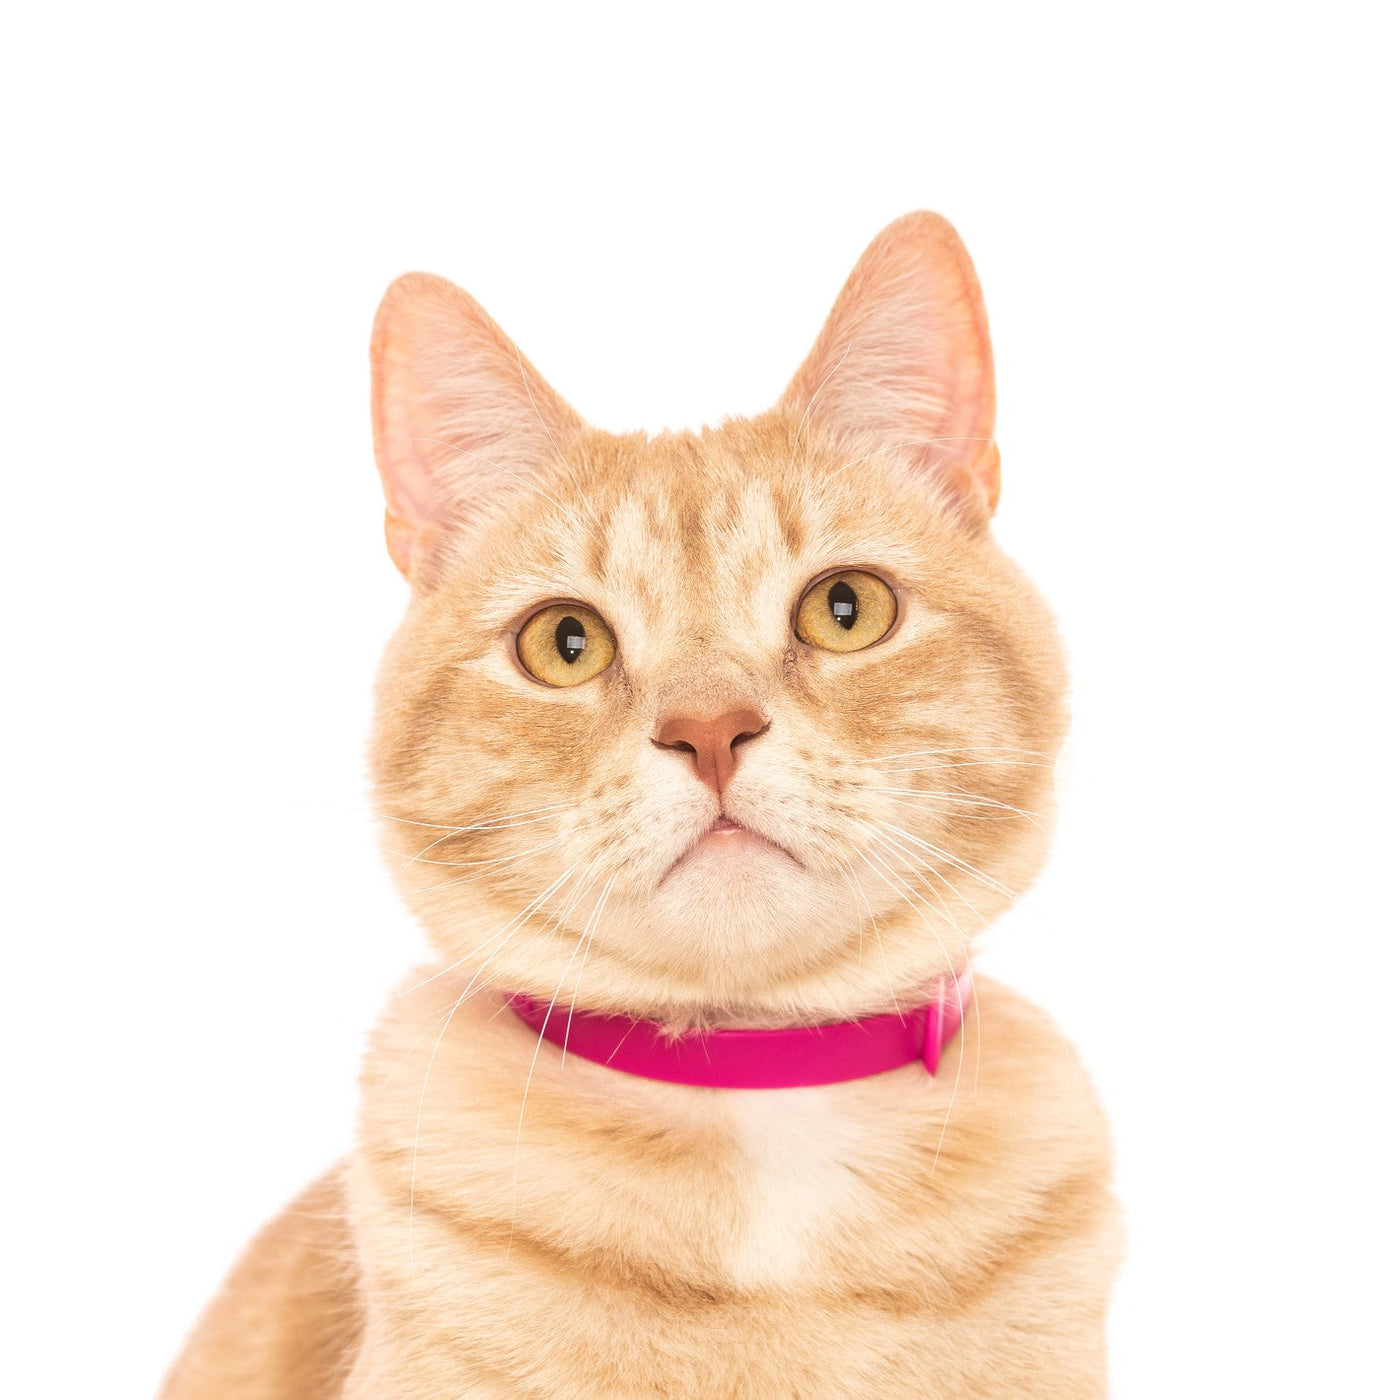 NUVUQ - Comfortable Cat Collar - Pack of 5 (Pink, Blue, Black, Red and Orange)